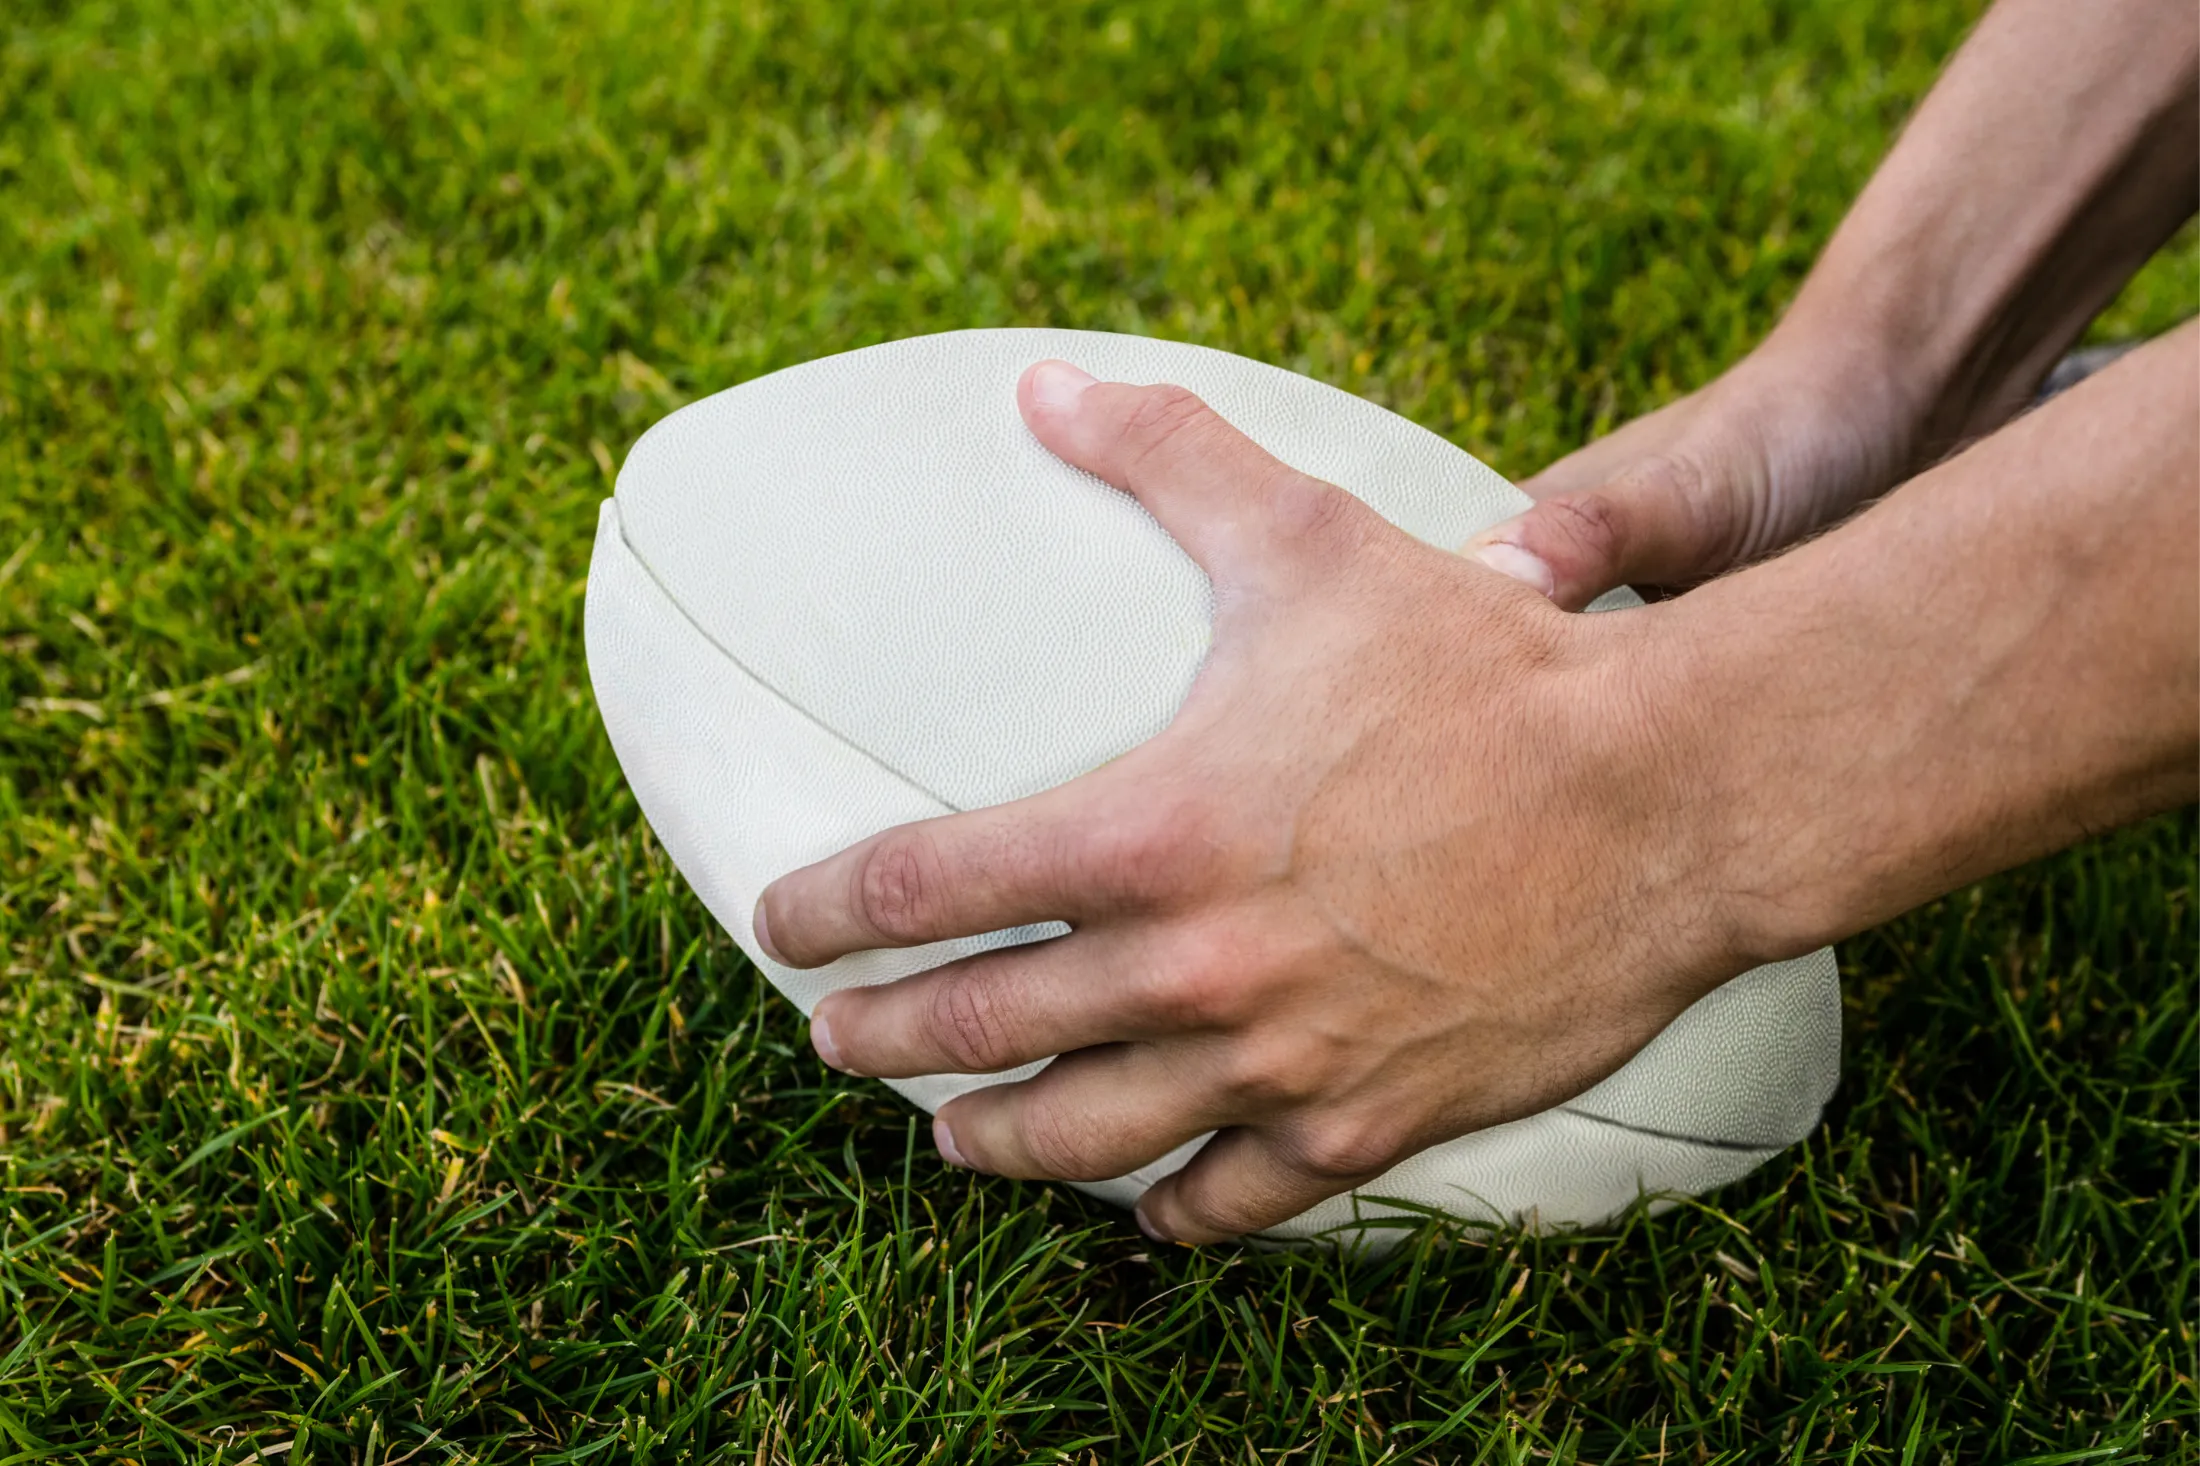 A rugby ball being placed on a stadium field